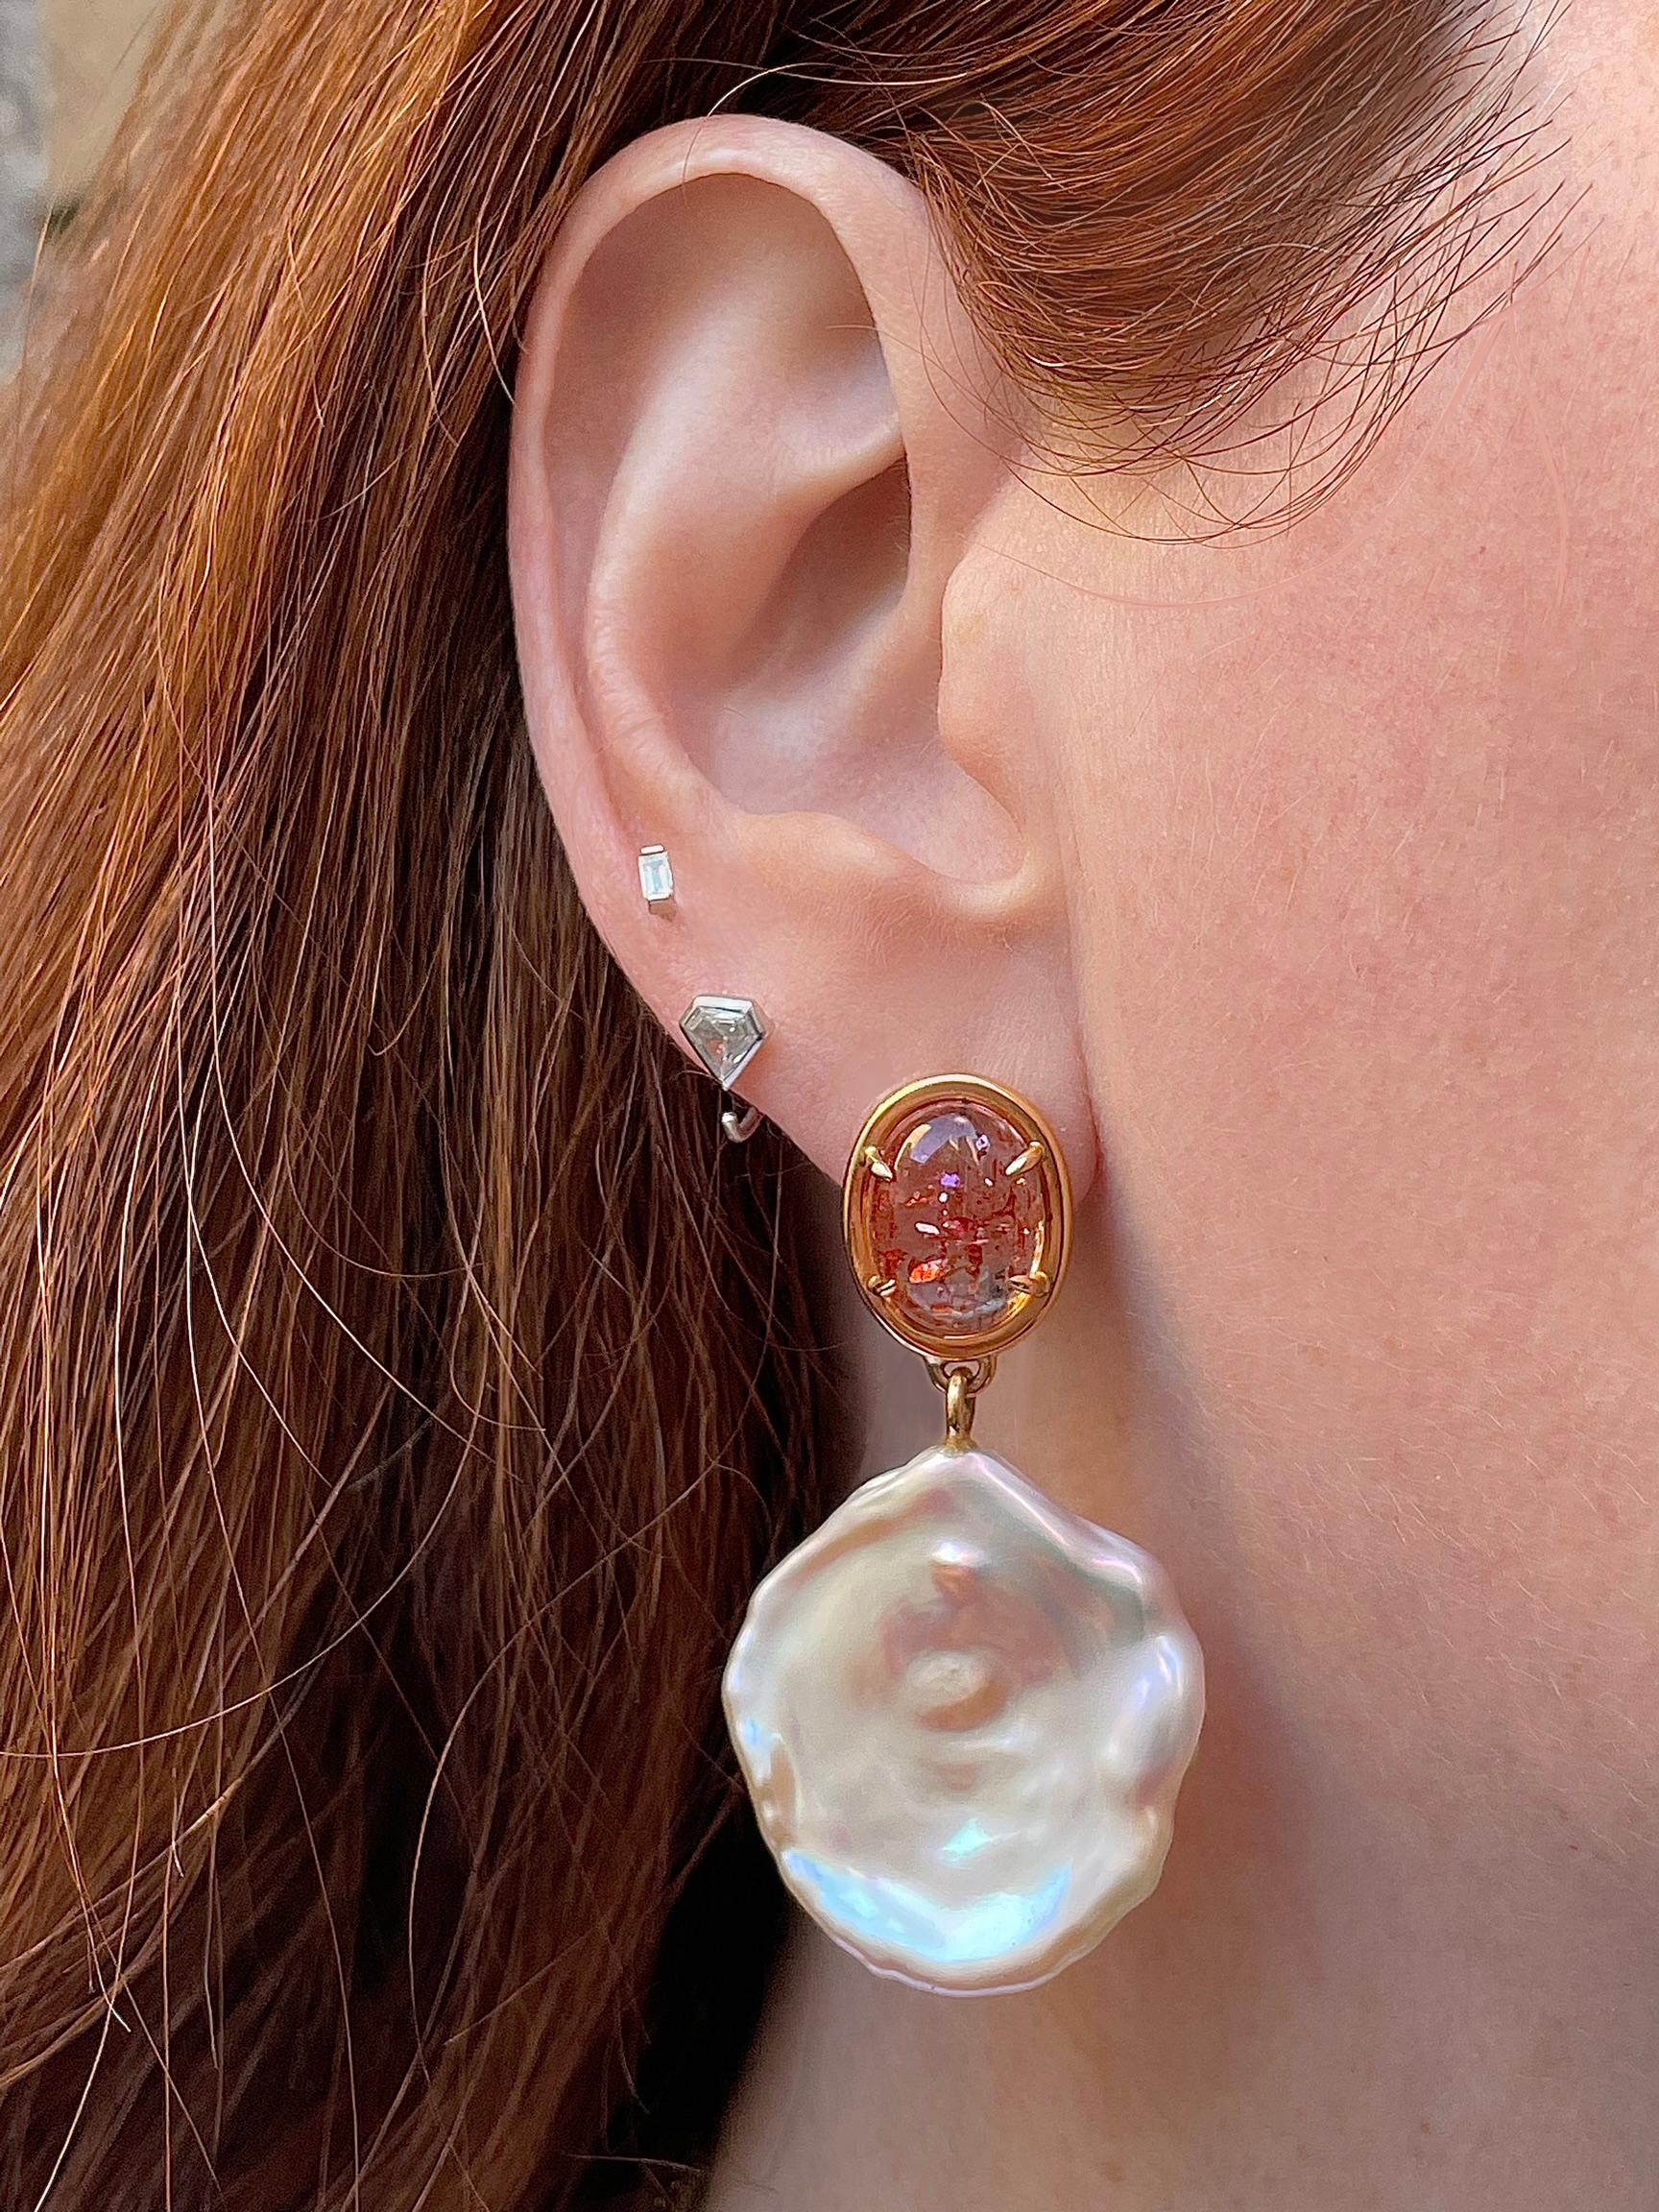 Gem quality oval sunstone cabochons (10X13mm) transparent and freckled auburn, are hand set in 18K rose gold. Dropping from these gems is the perfect color compliment-  a creamy and lustrous coordinated pearl pair in the most flattering peachy pink